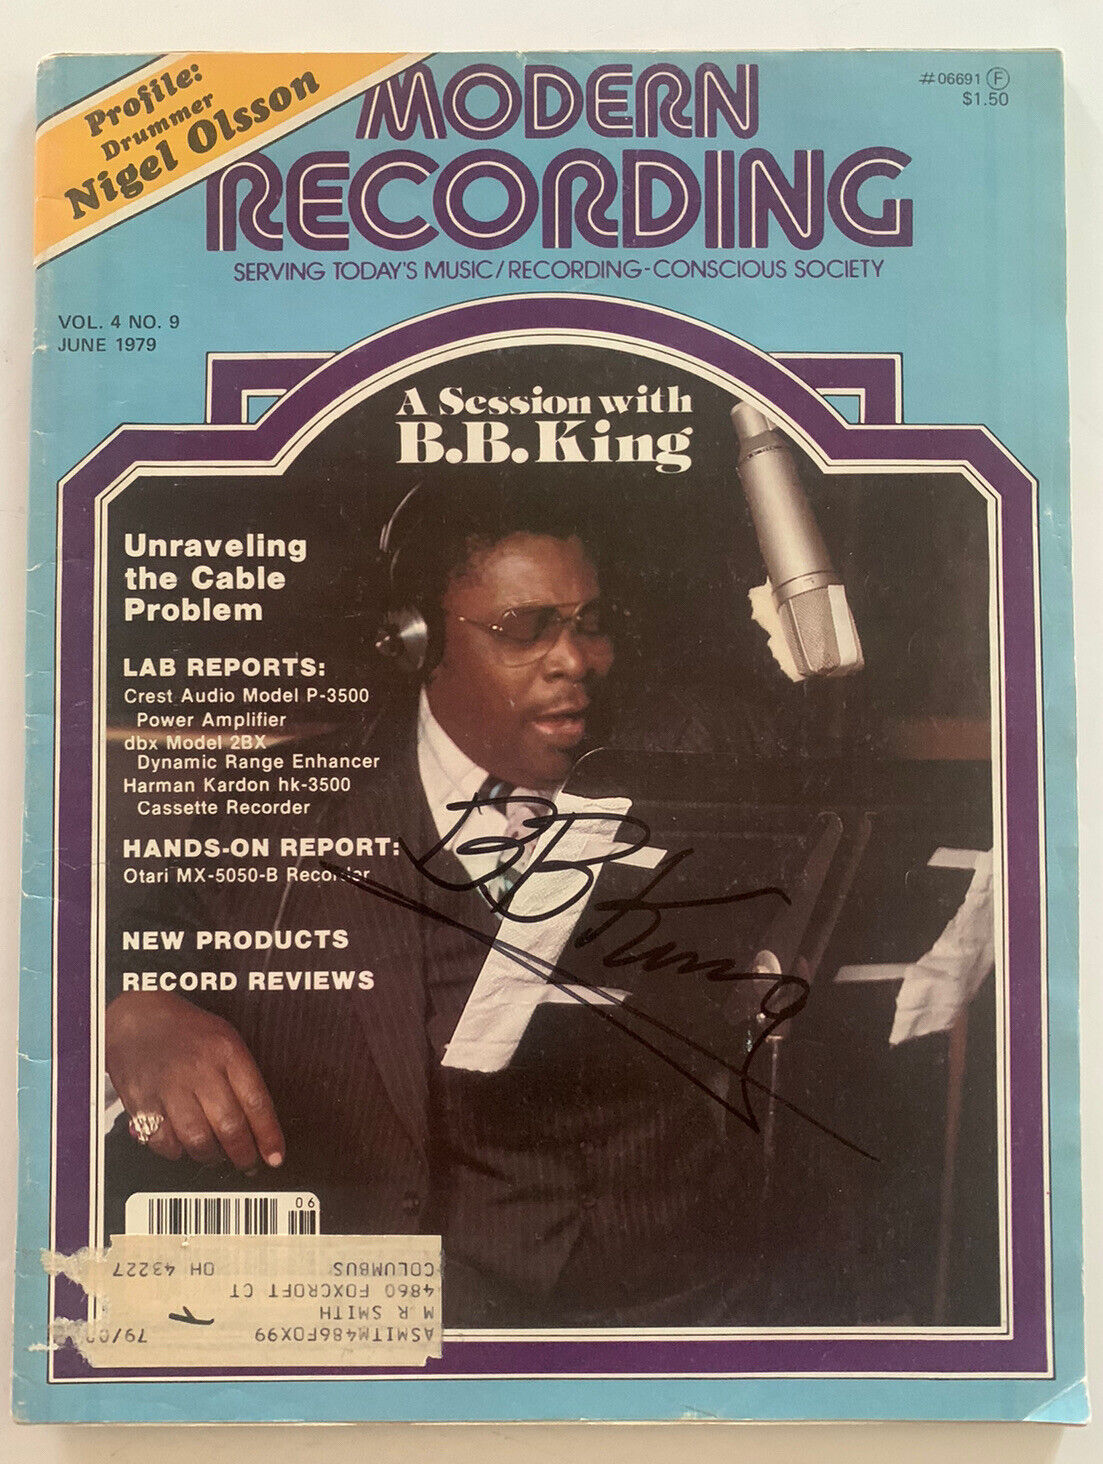 BB King Signed Autographed Modern Recording Magazine Cover Photo Poster painting BAS Certified